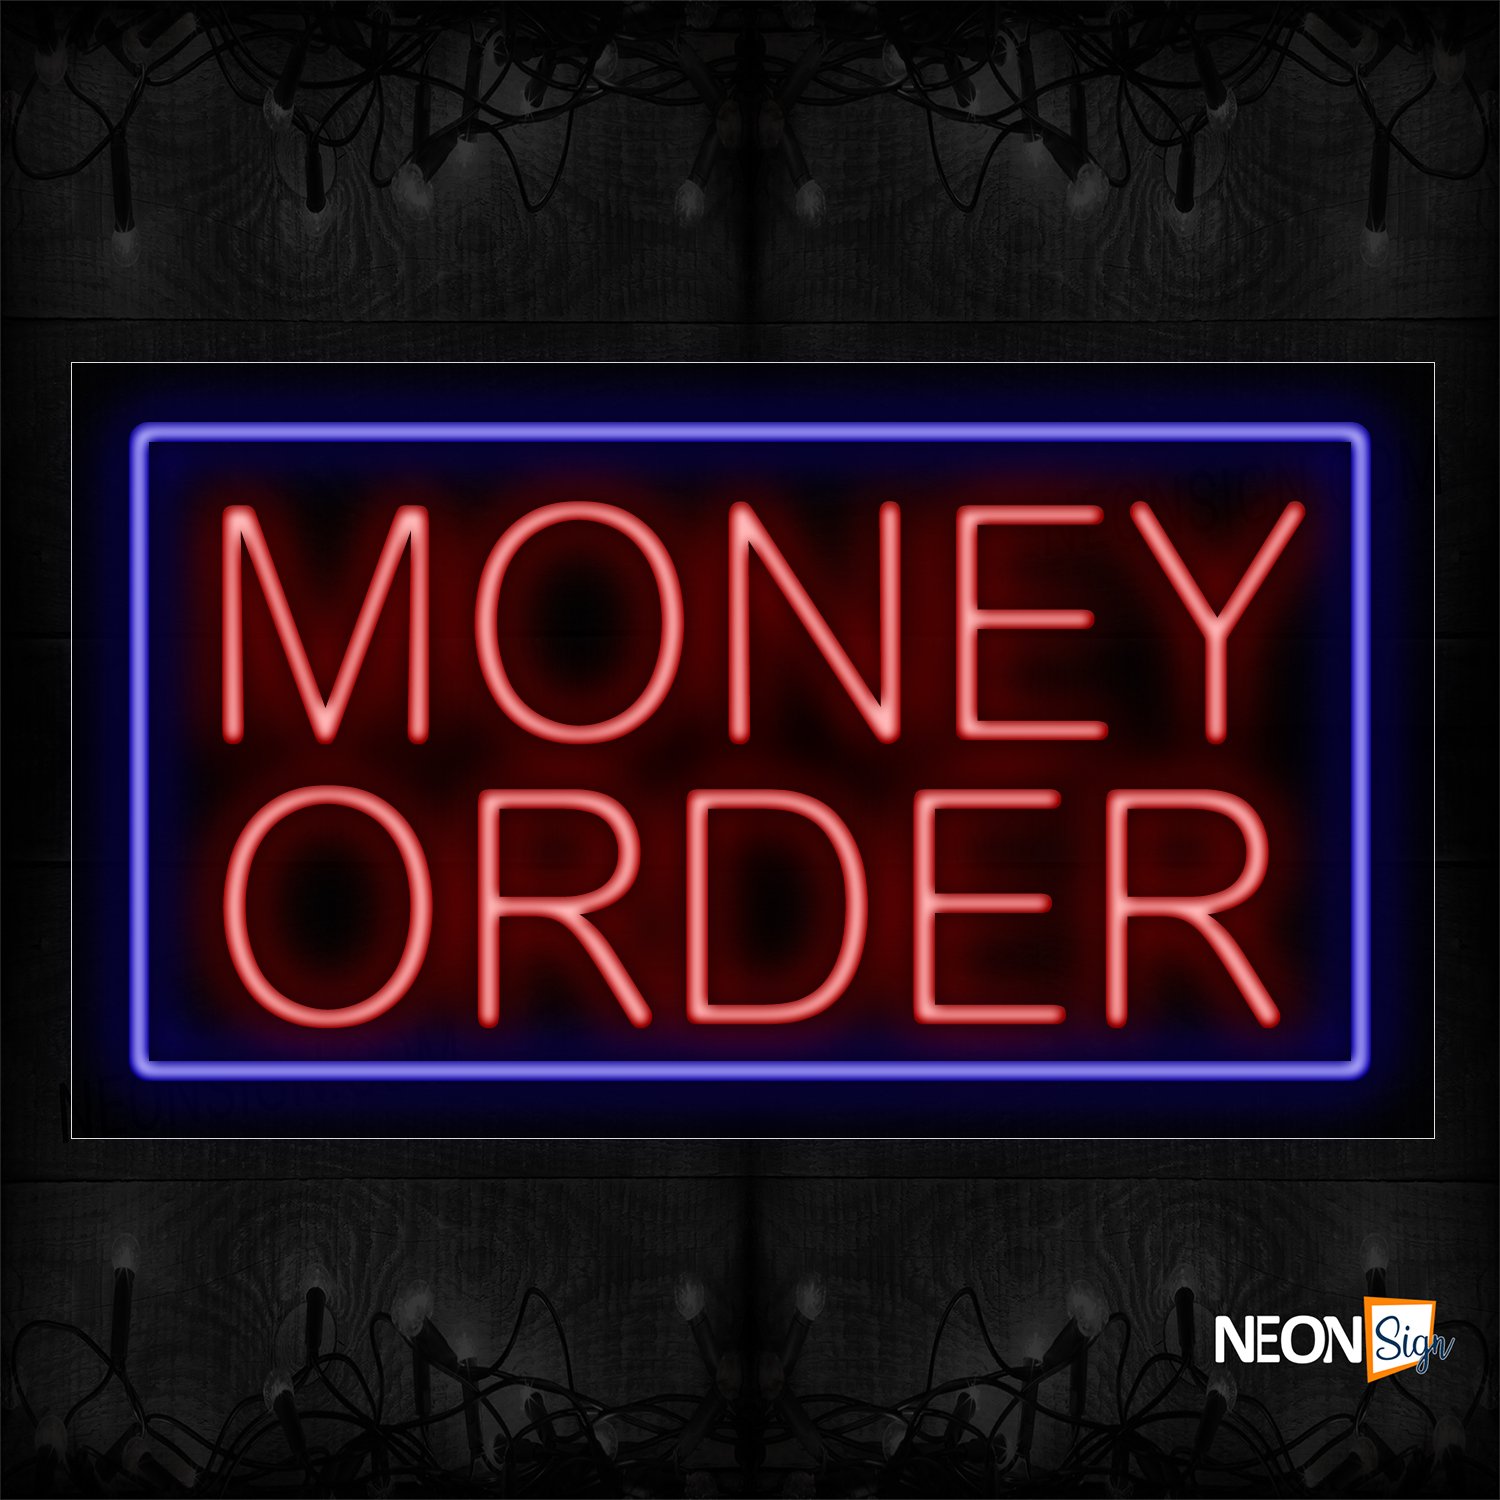 Image of 11094 Money Order With Blue Border Traditional Neon_20x37 Black Backing